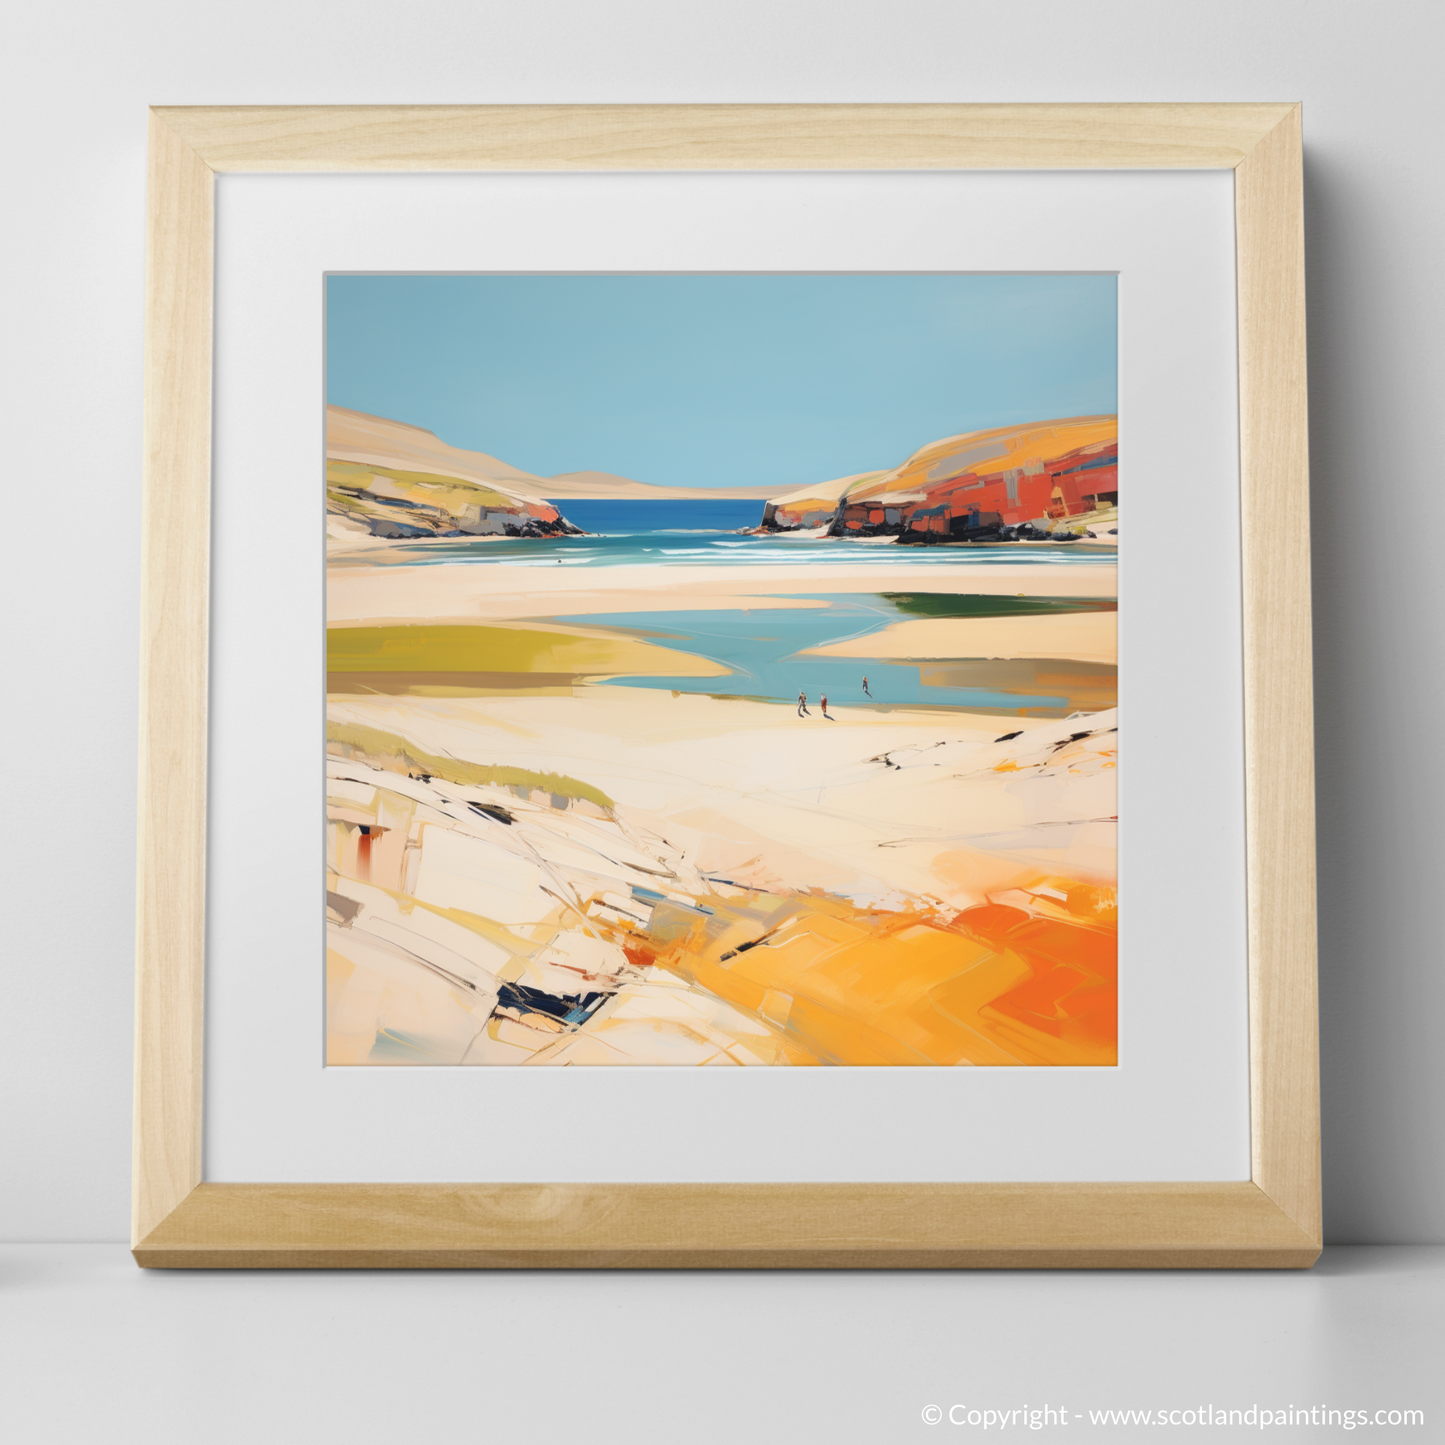 Art Print of Sandwood Bay, Sutherland in summer with a natural frame